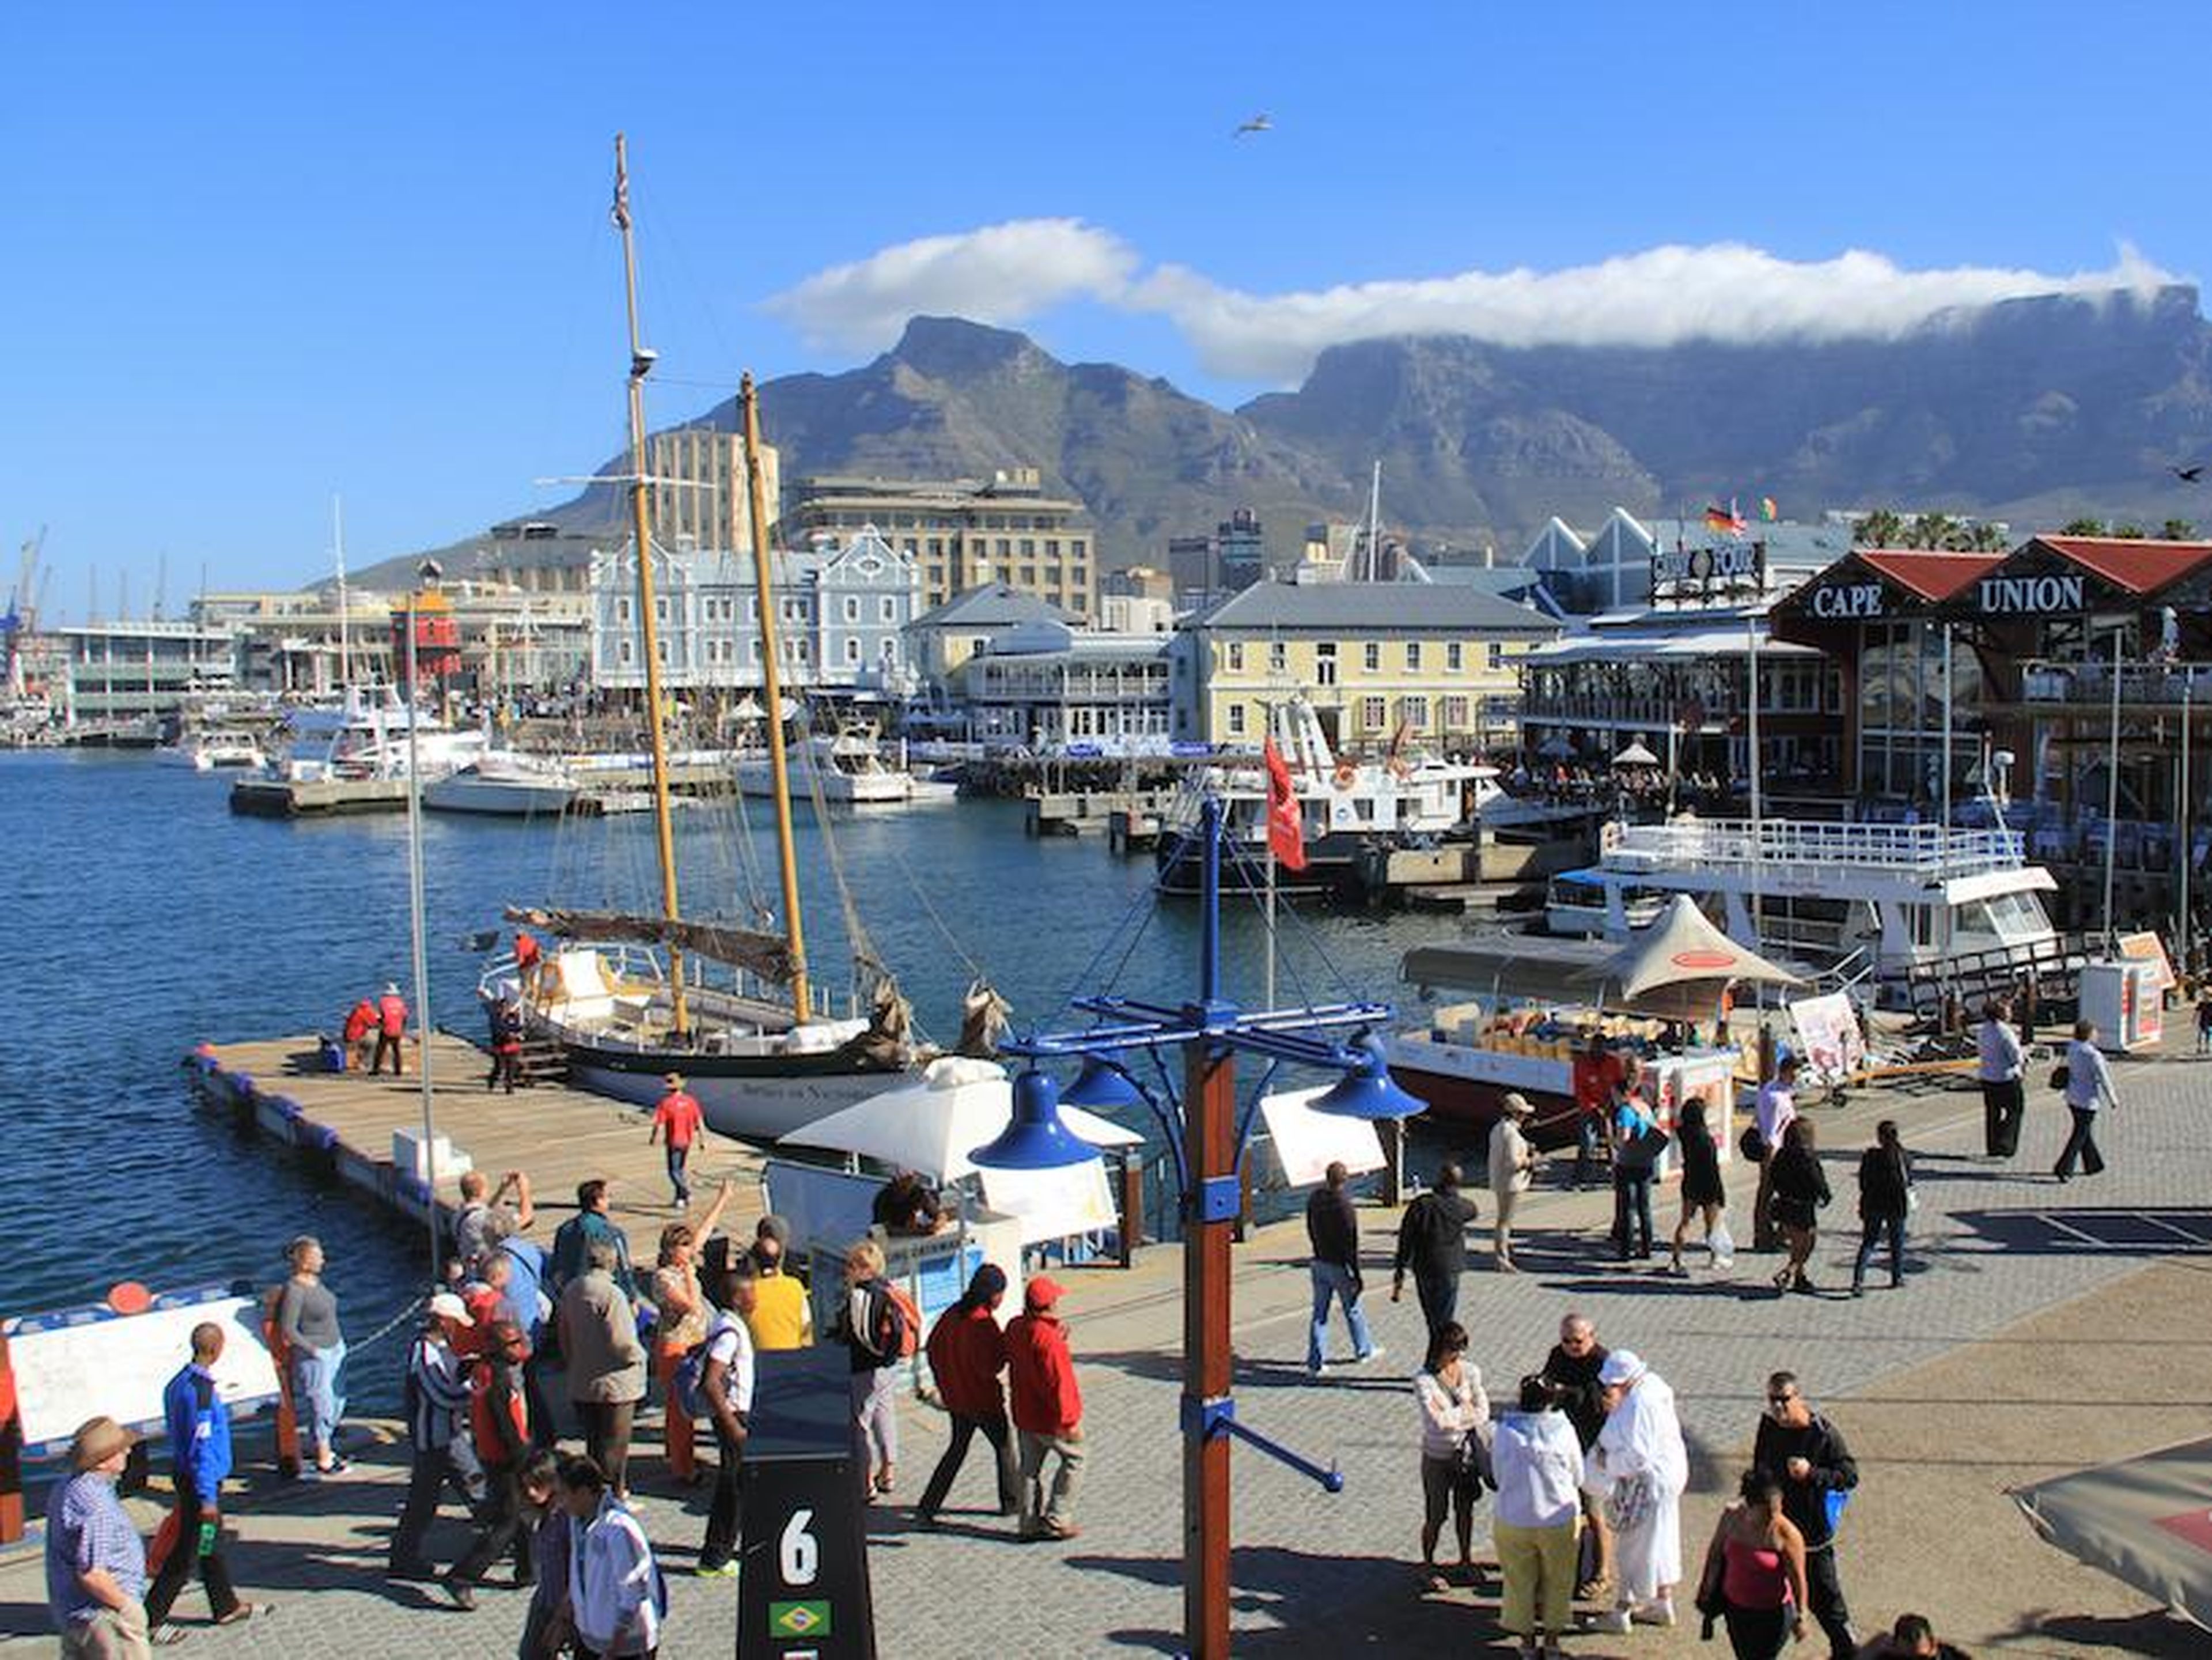 The trip from Cape Town's port takes approximately six days, and the ships leave on an inconsistent schedule — sometimes they set sail multiple times per month and sometimes they skip a month entirely.